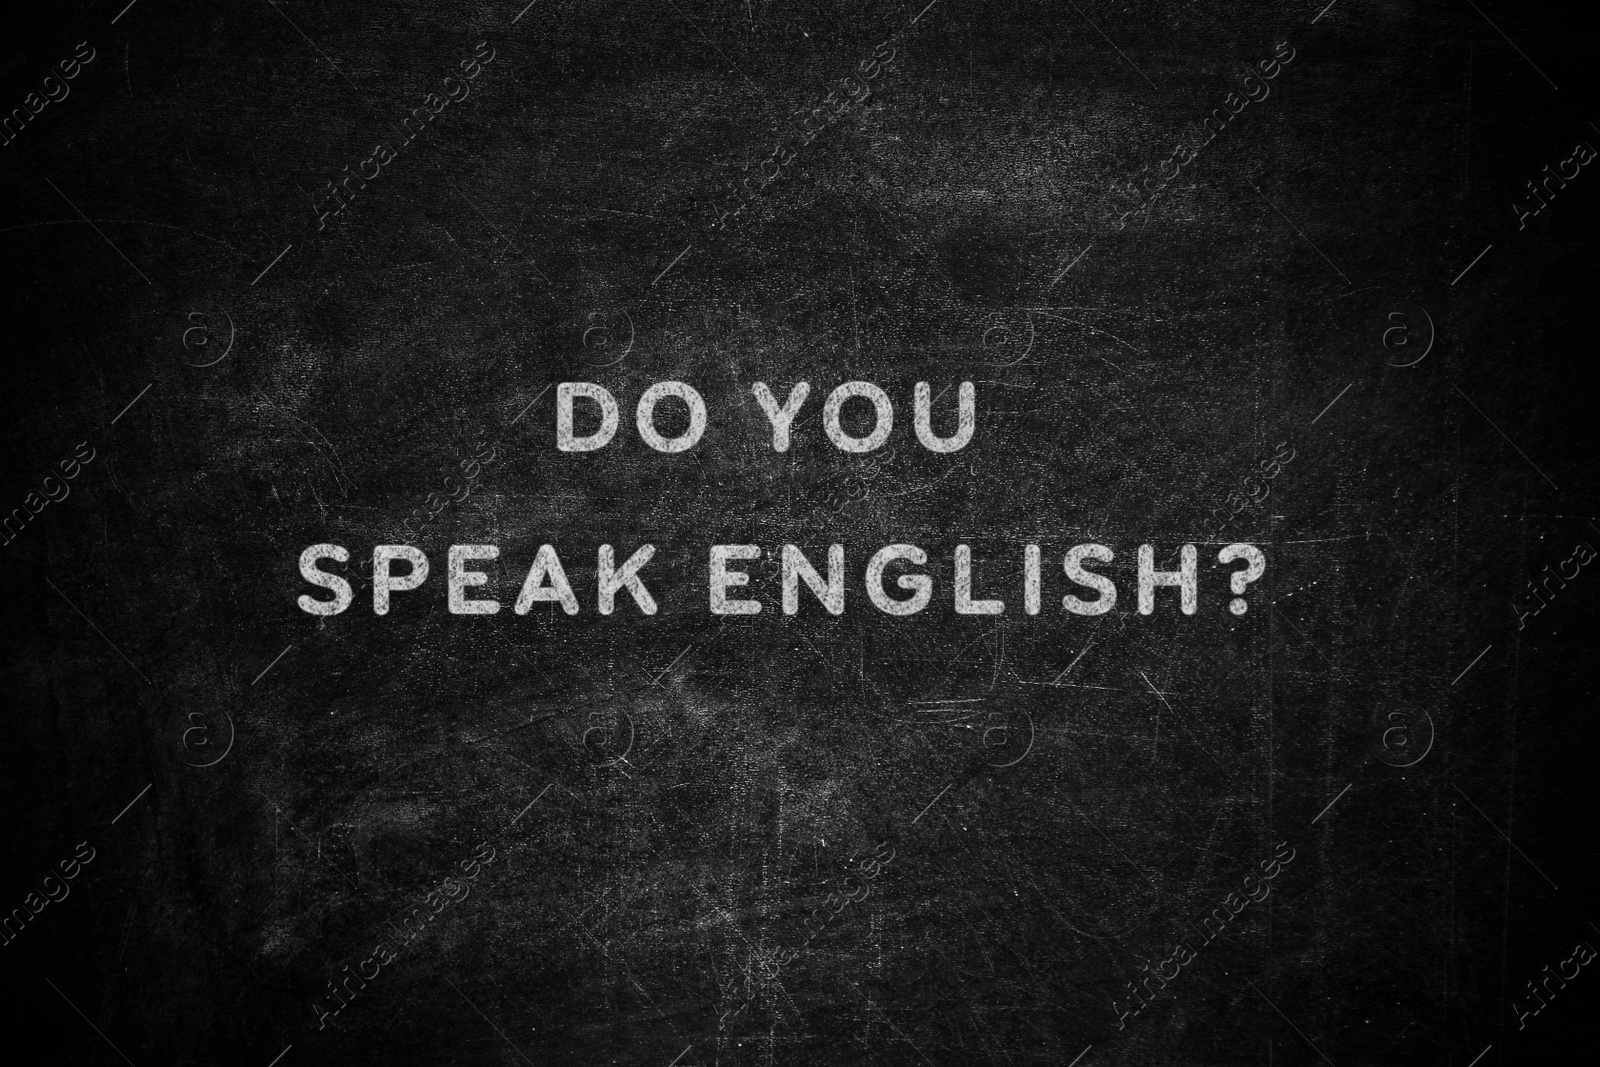 Image of Black chalkboard with text Do You Speak English